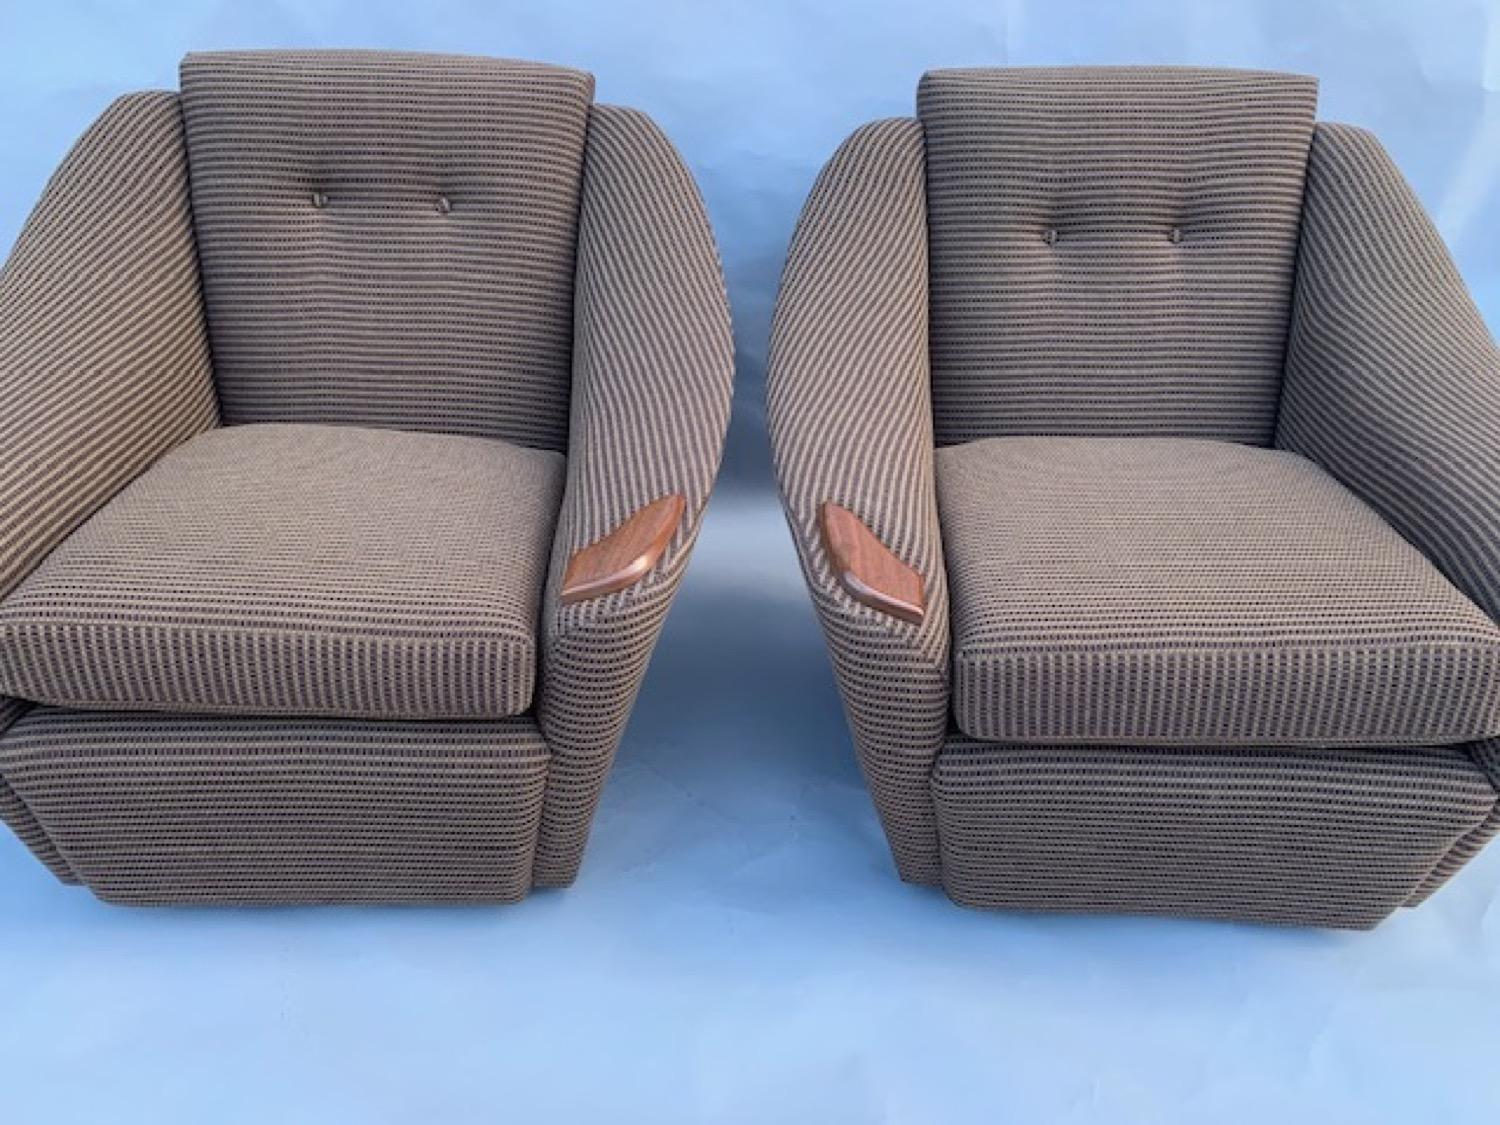 Mid-Century Modern Pair of 1960s Armchairs in Brown Bute Fabric with Polished Teak Handrests For Sale